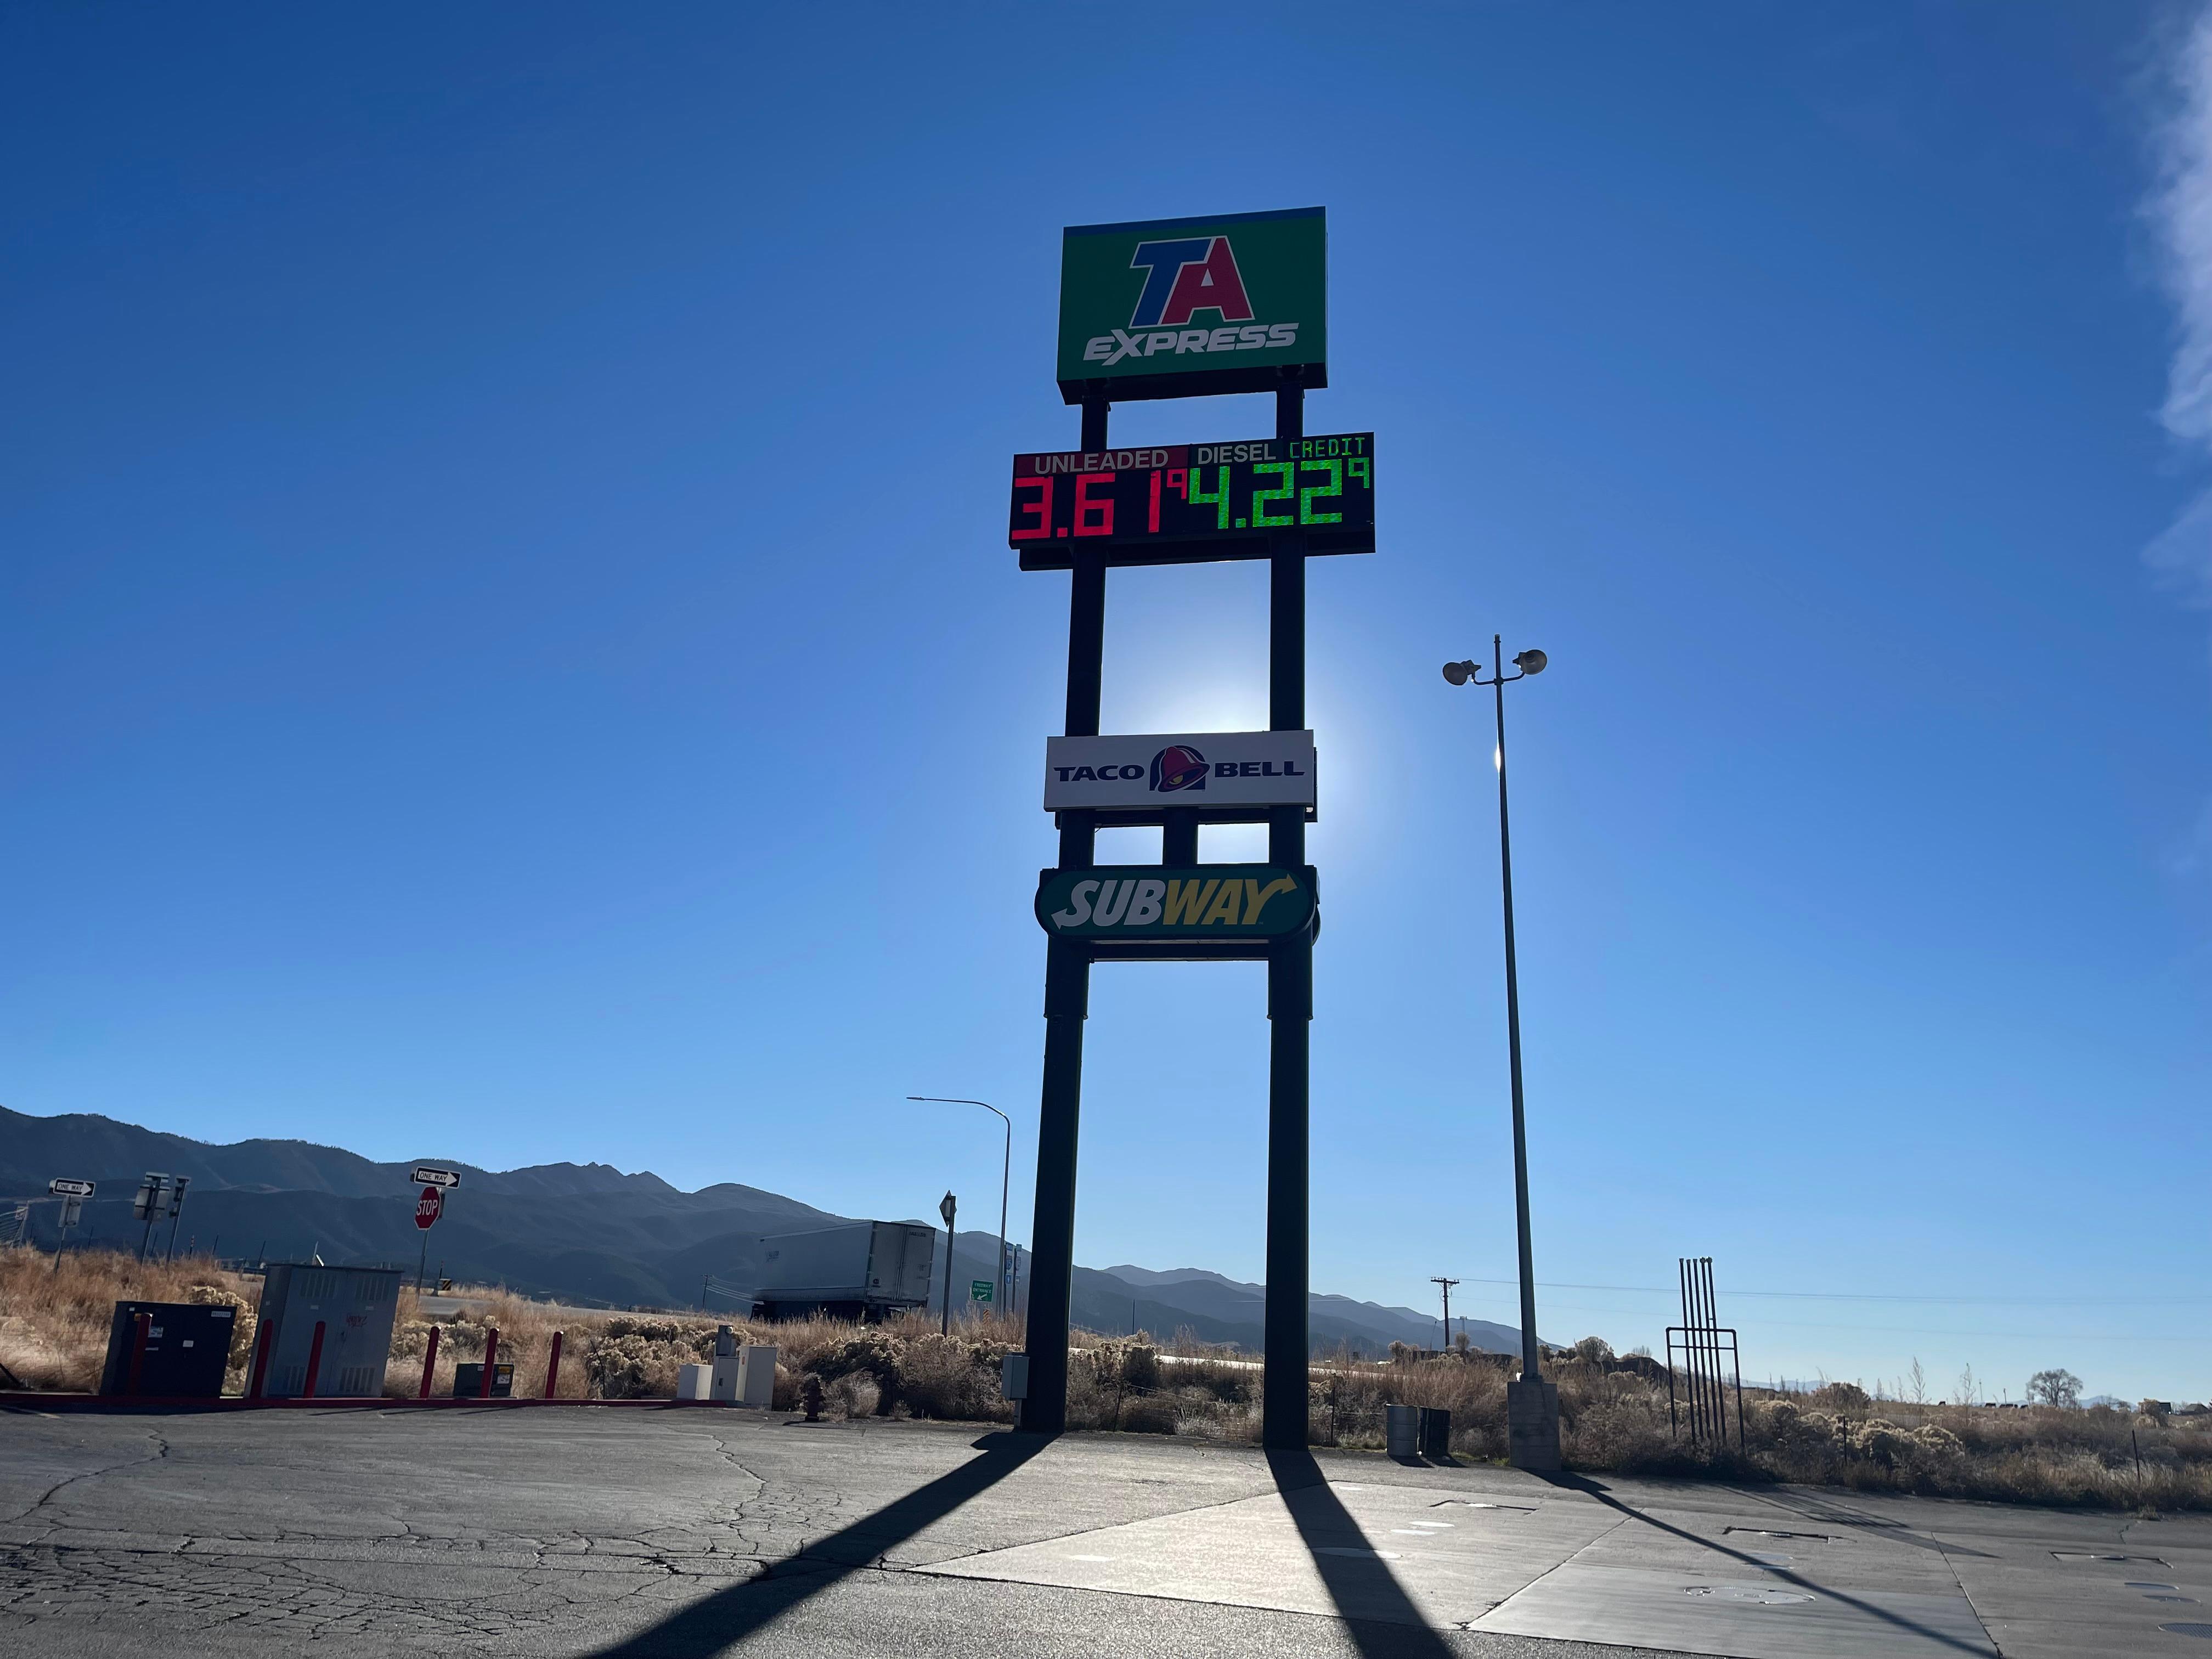 Make TA Express in Parowan, UT on I-15 at Exit 78 a part of your route. We’re ready to fuel your trip with Shell gas or diesel 24/7.